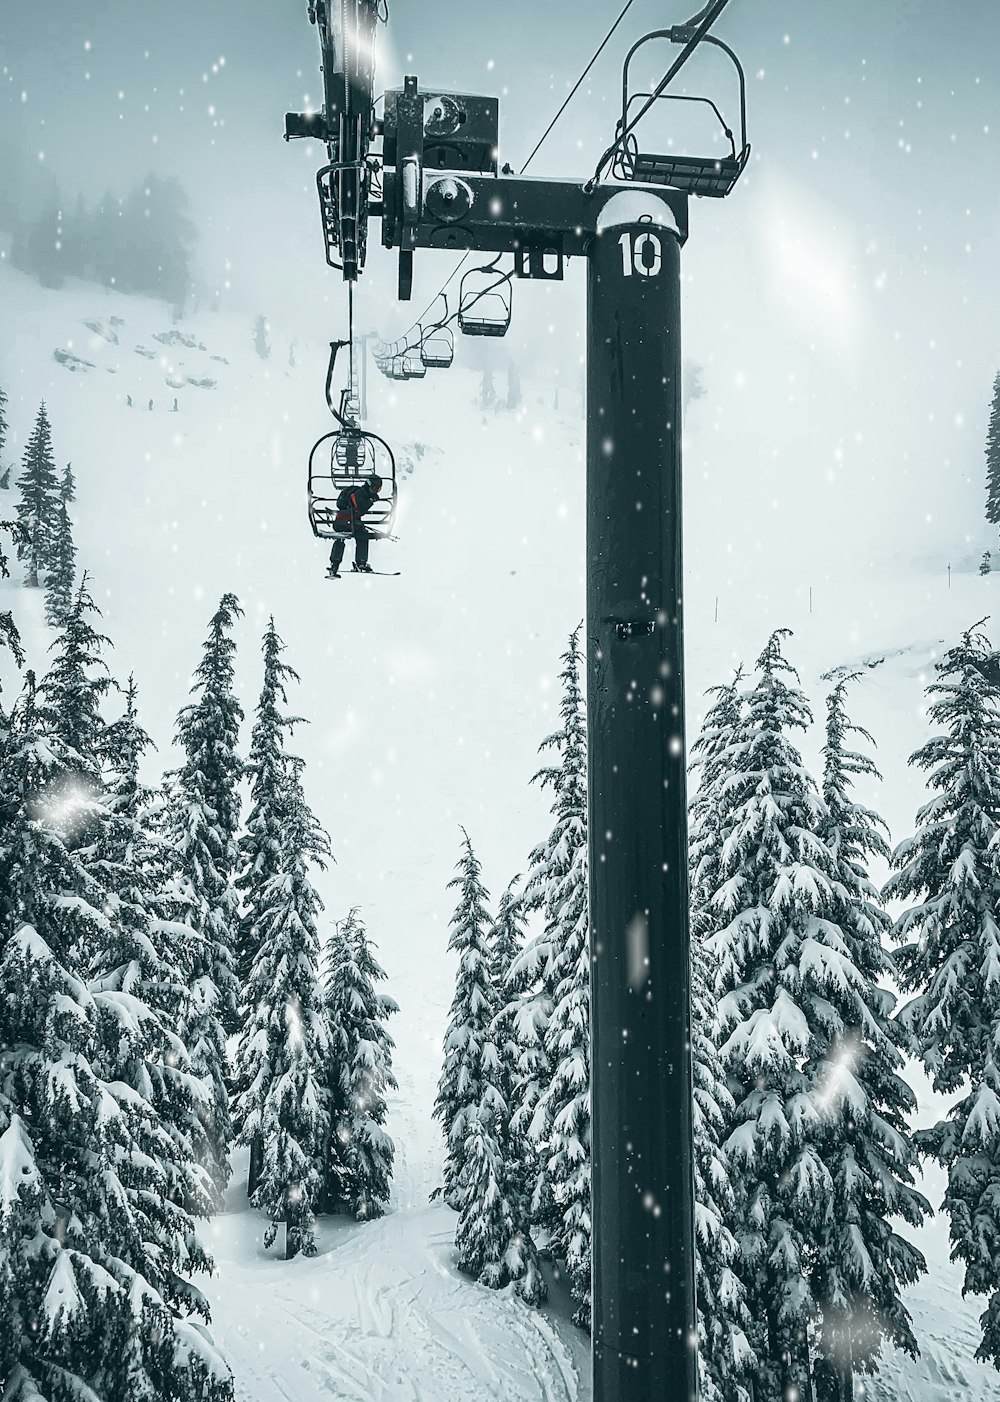 black cable car over snow covered pine trees